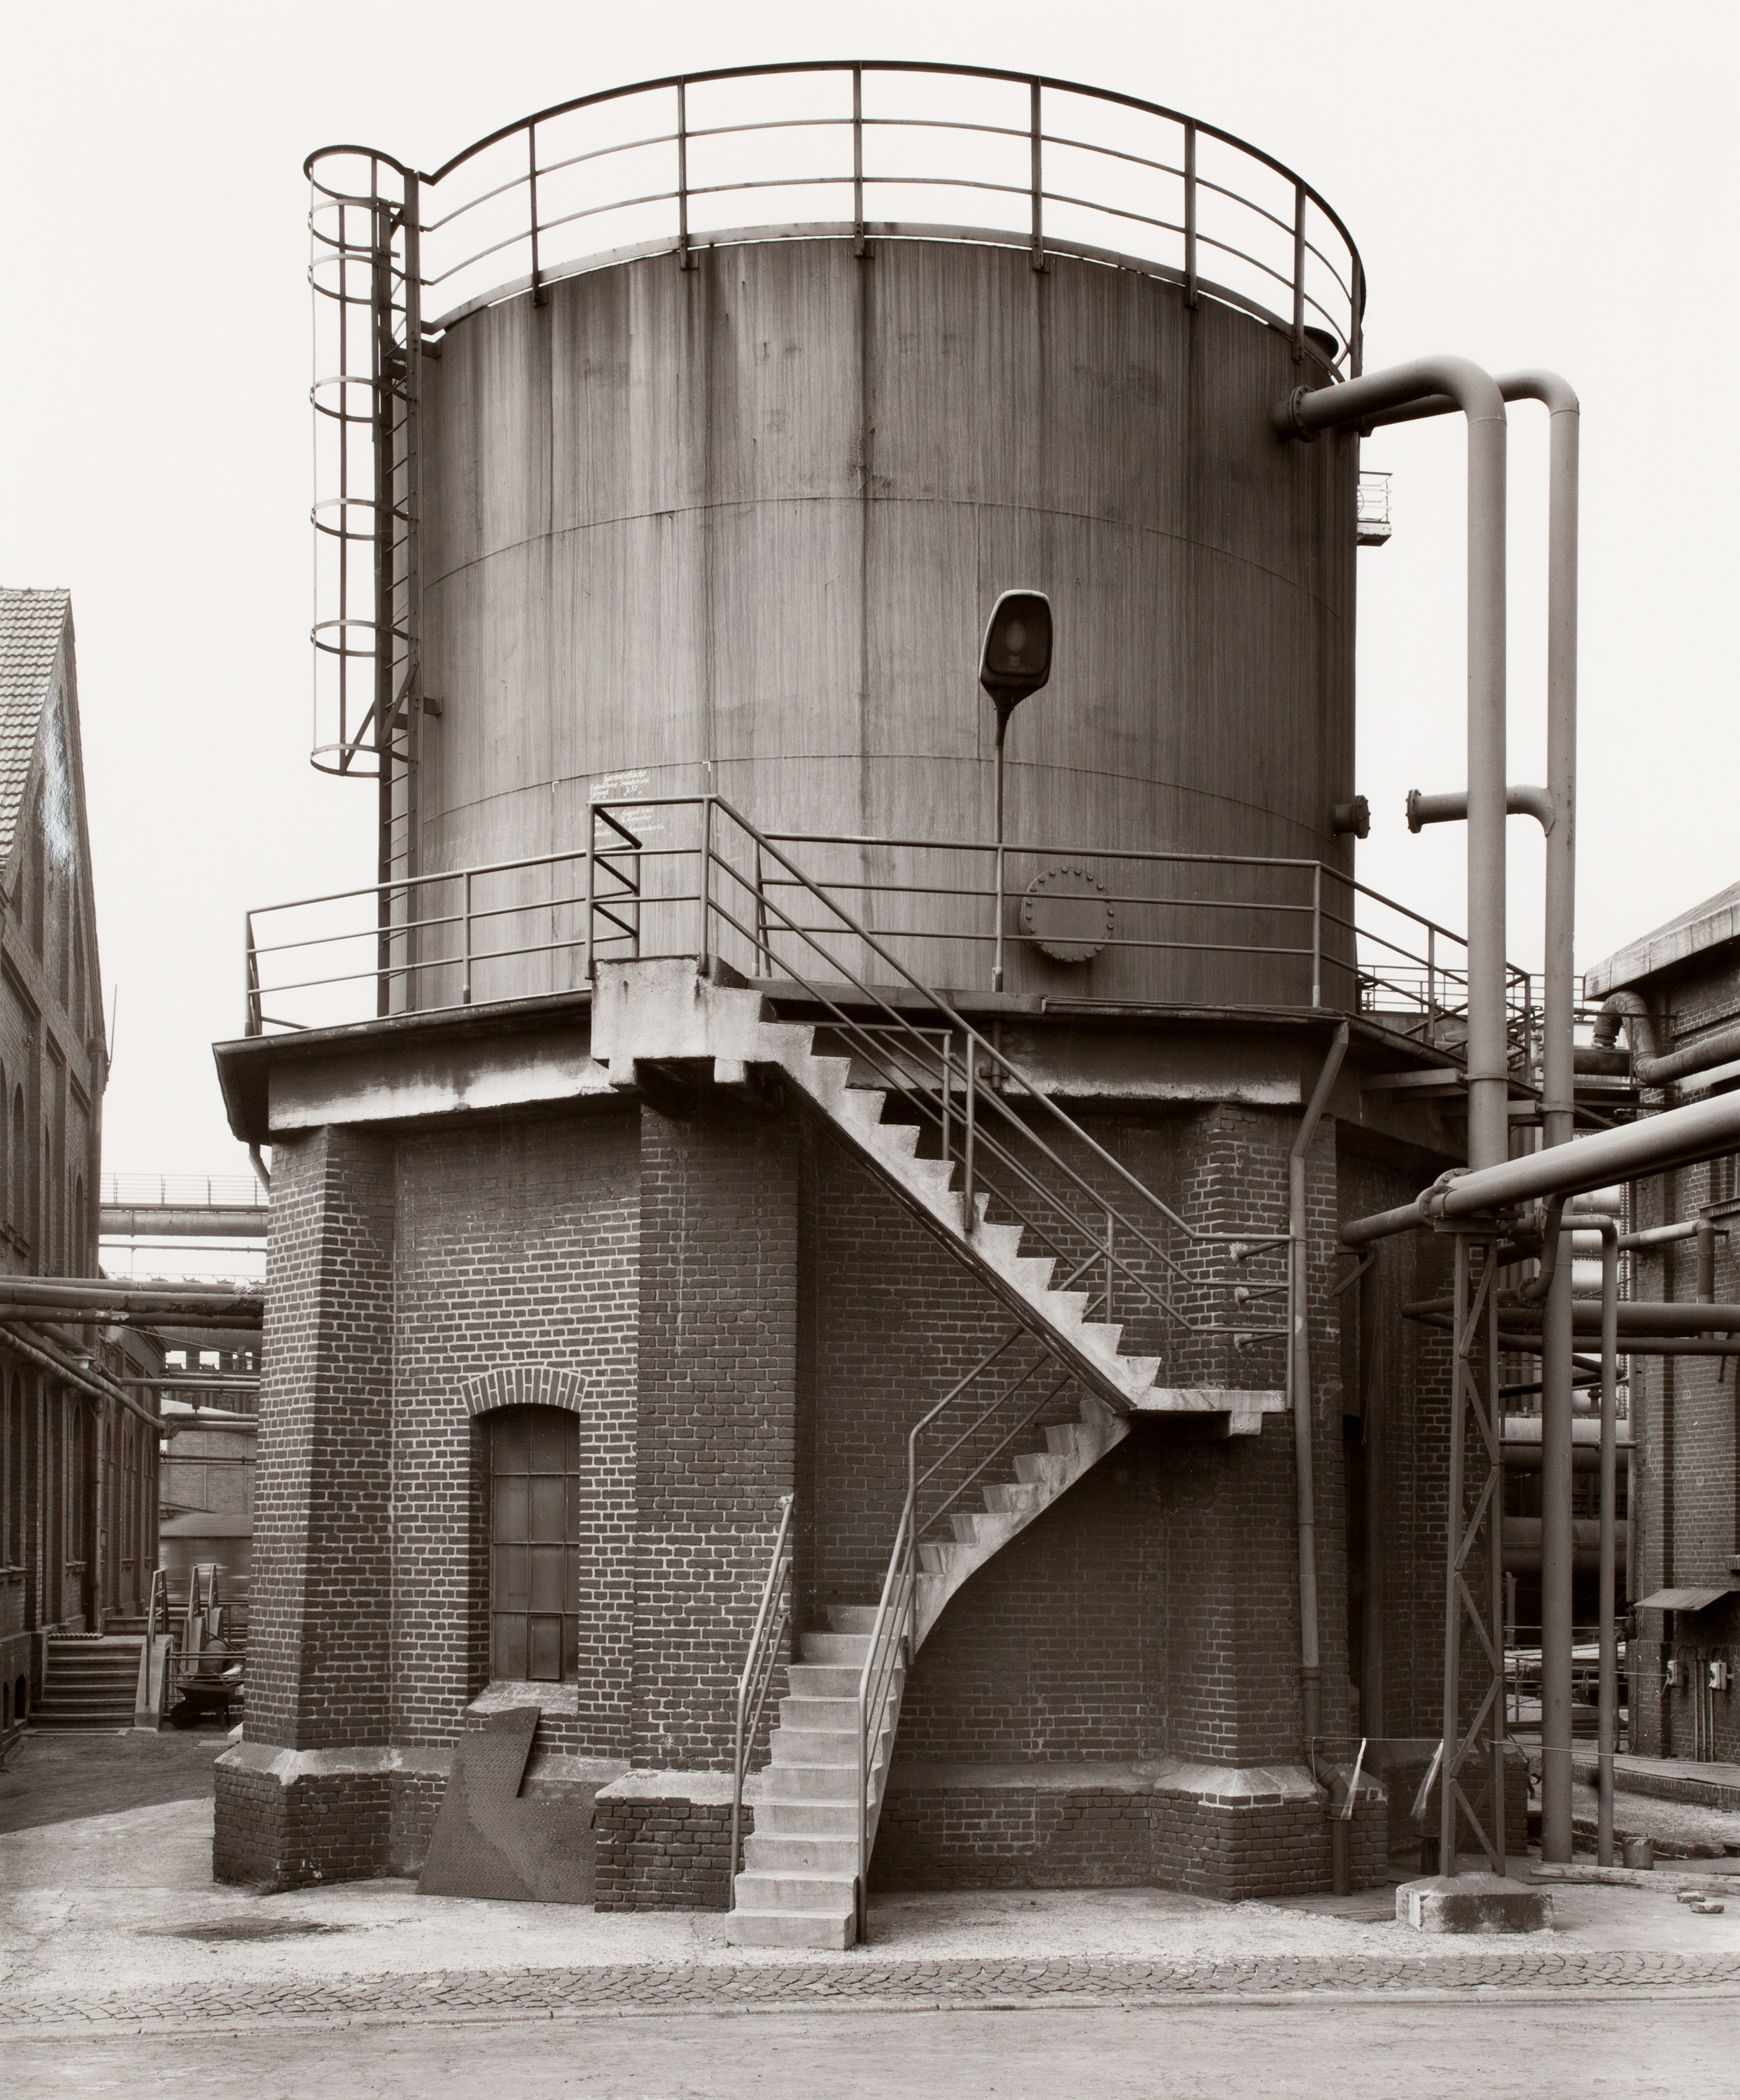 Black and white photograph of a water tower made partially of bricks